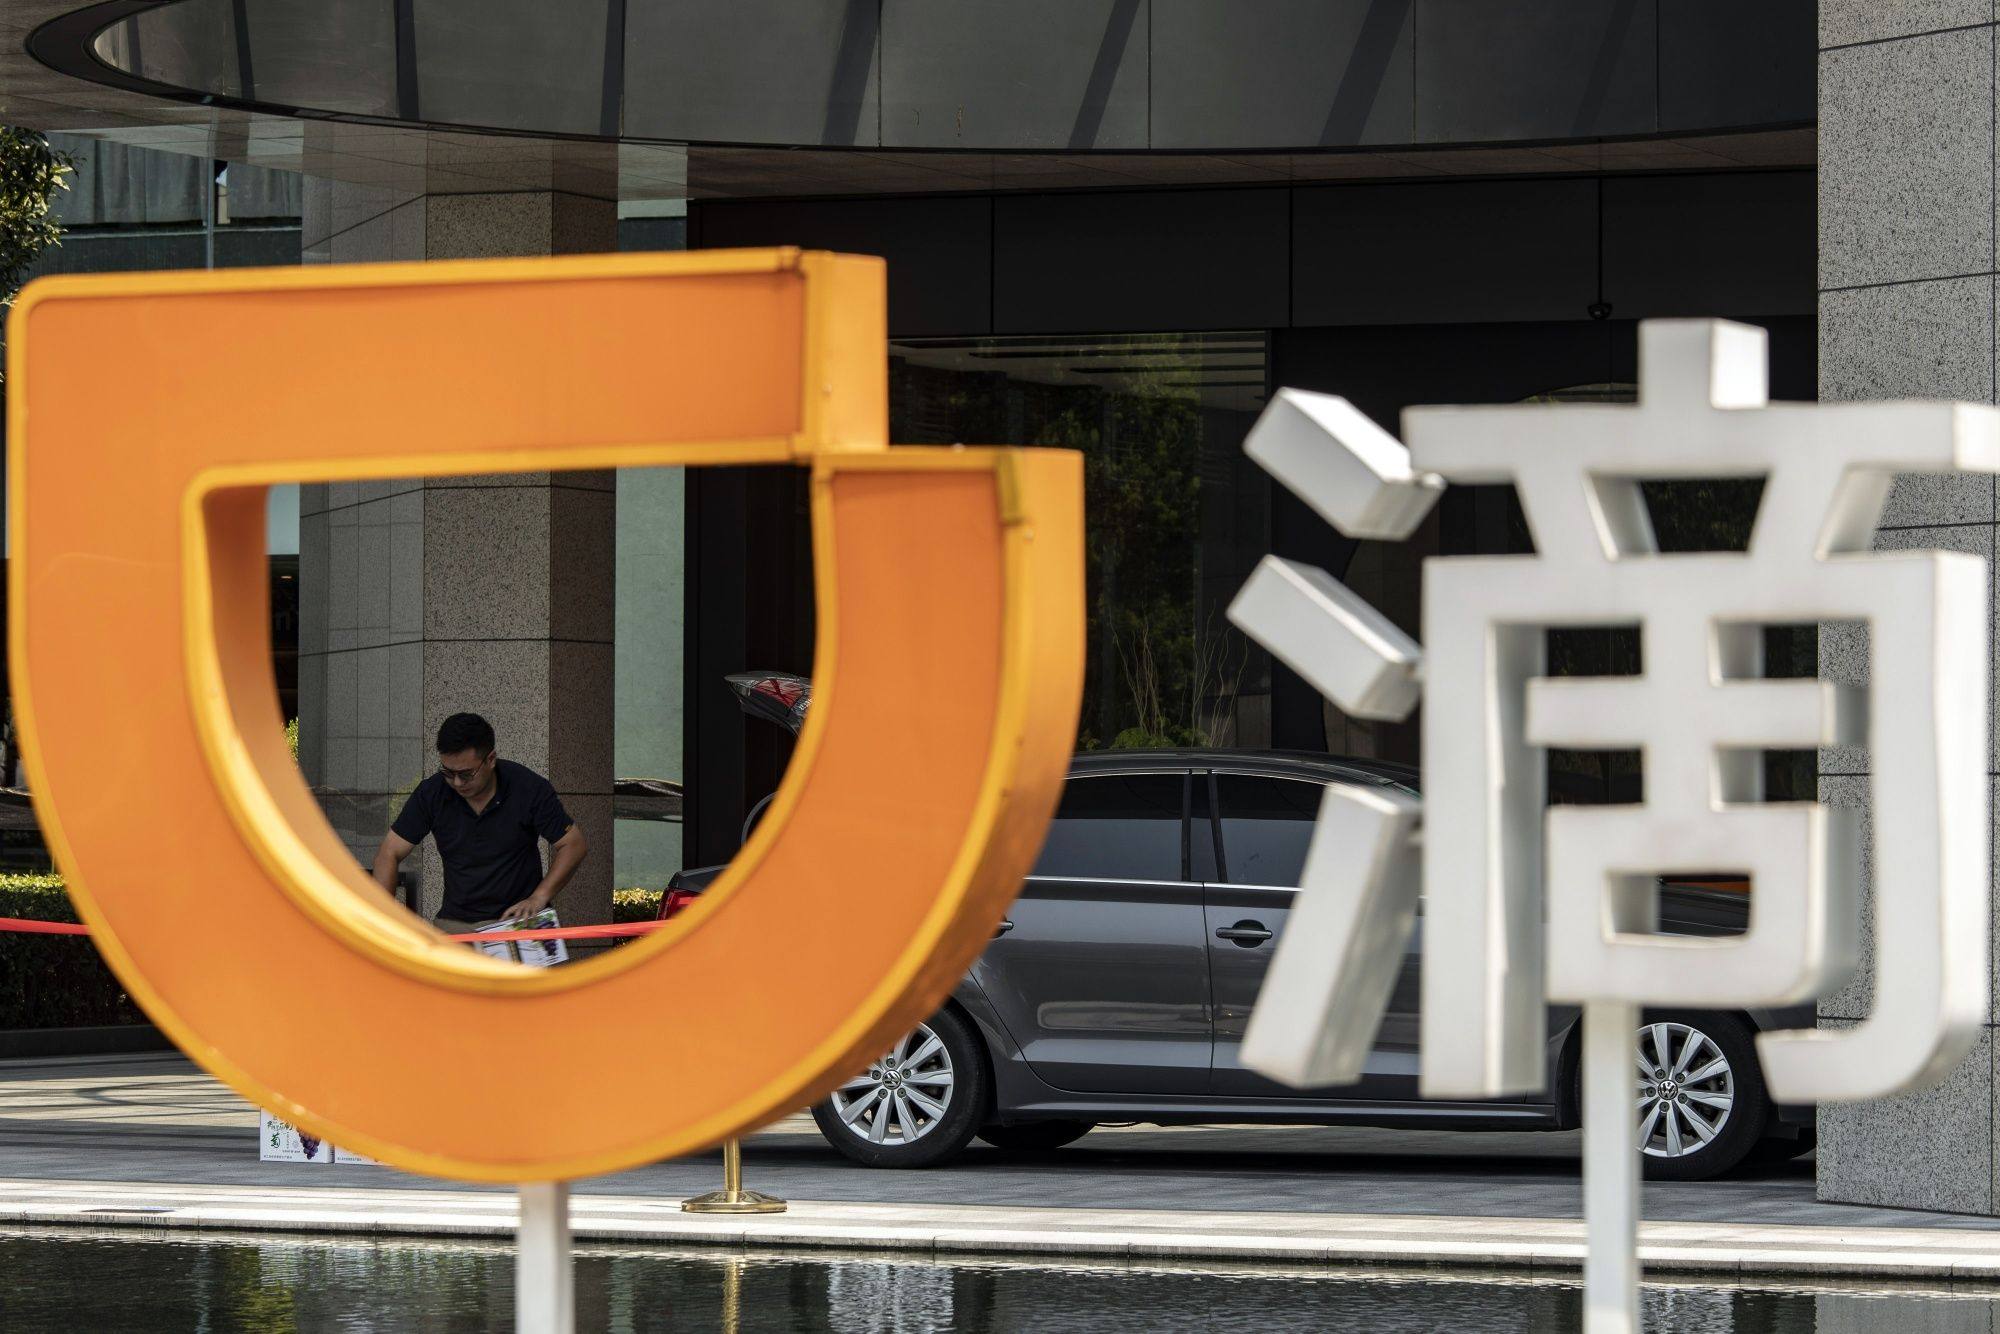 Signage at the Didi Chuxing offices in Hangzhou, China. Photo: Bloomberg